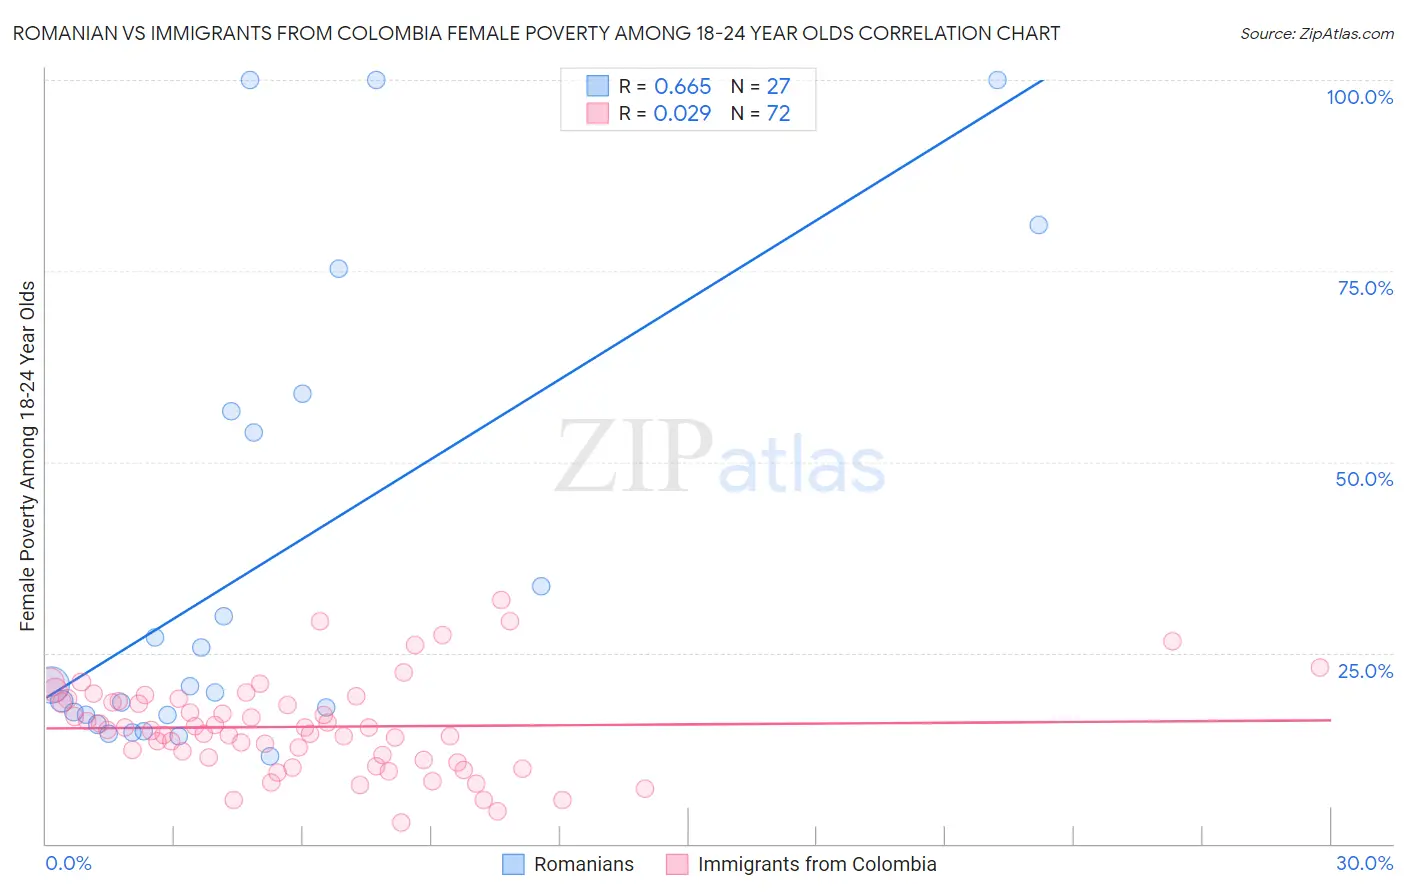 Romanian vs Immigrants from Colombia Female Poverty Among 18-24 Year Olds